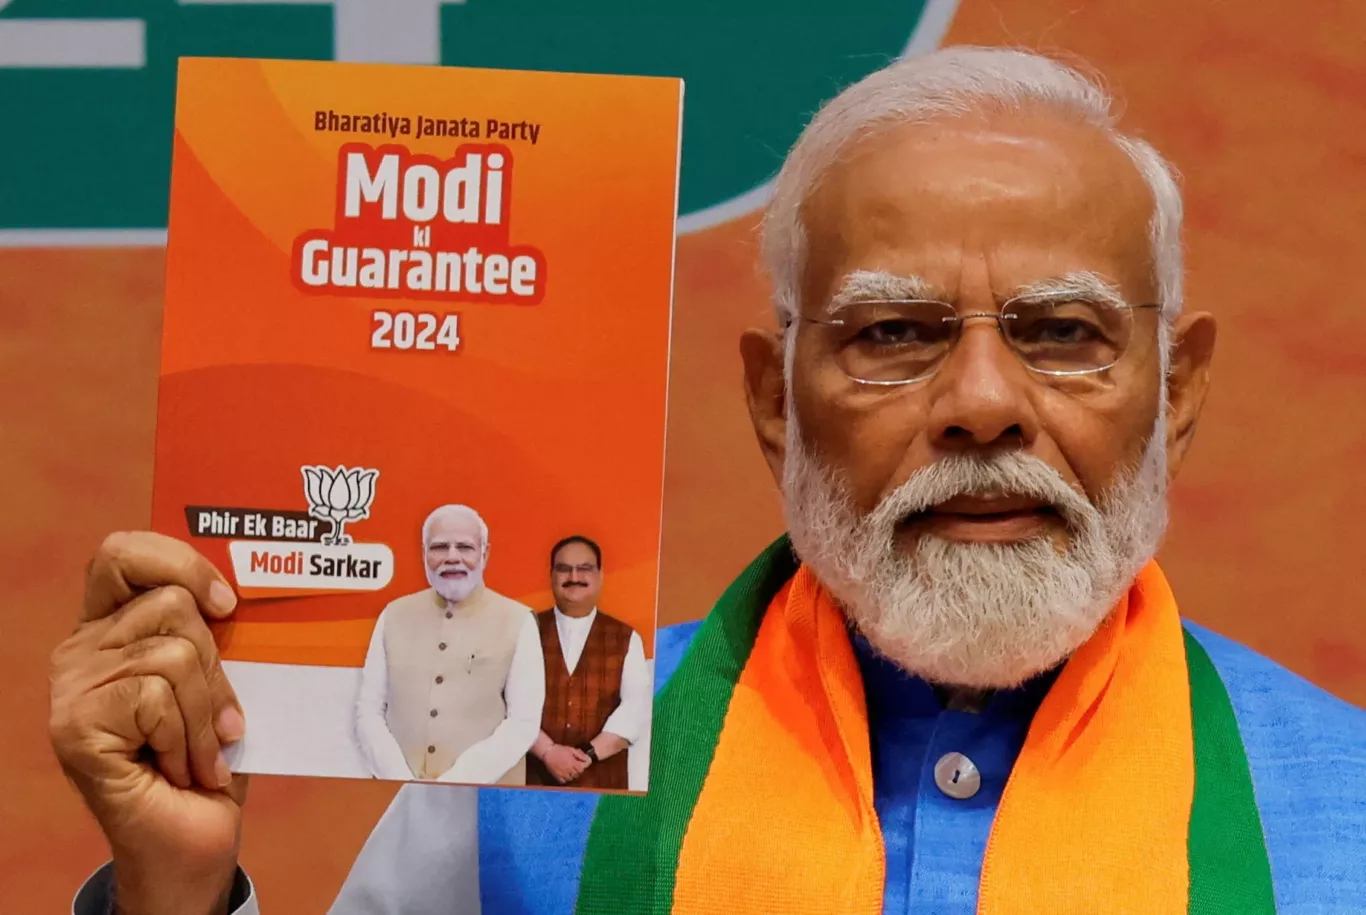 Indian Prime Minister Narendra Modi displays a copy of the ruling Bharatiya Janata Party's (BJP) election manifesto for the general election, in New Delhi, India, 14 April 2024 (Photo: Reuters/Adnan Abidi).